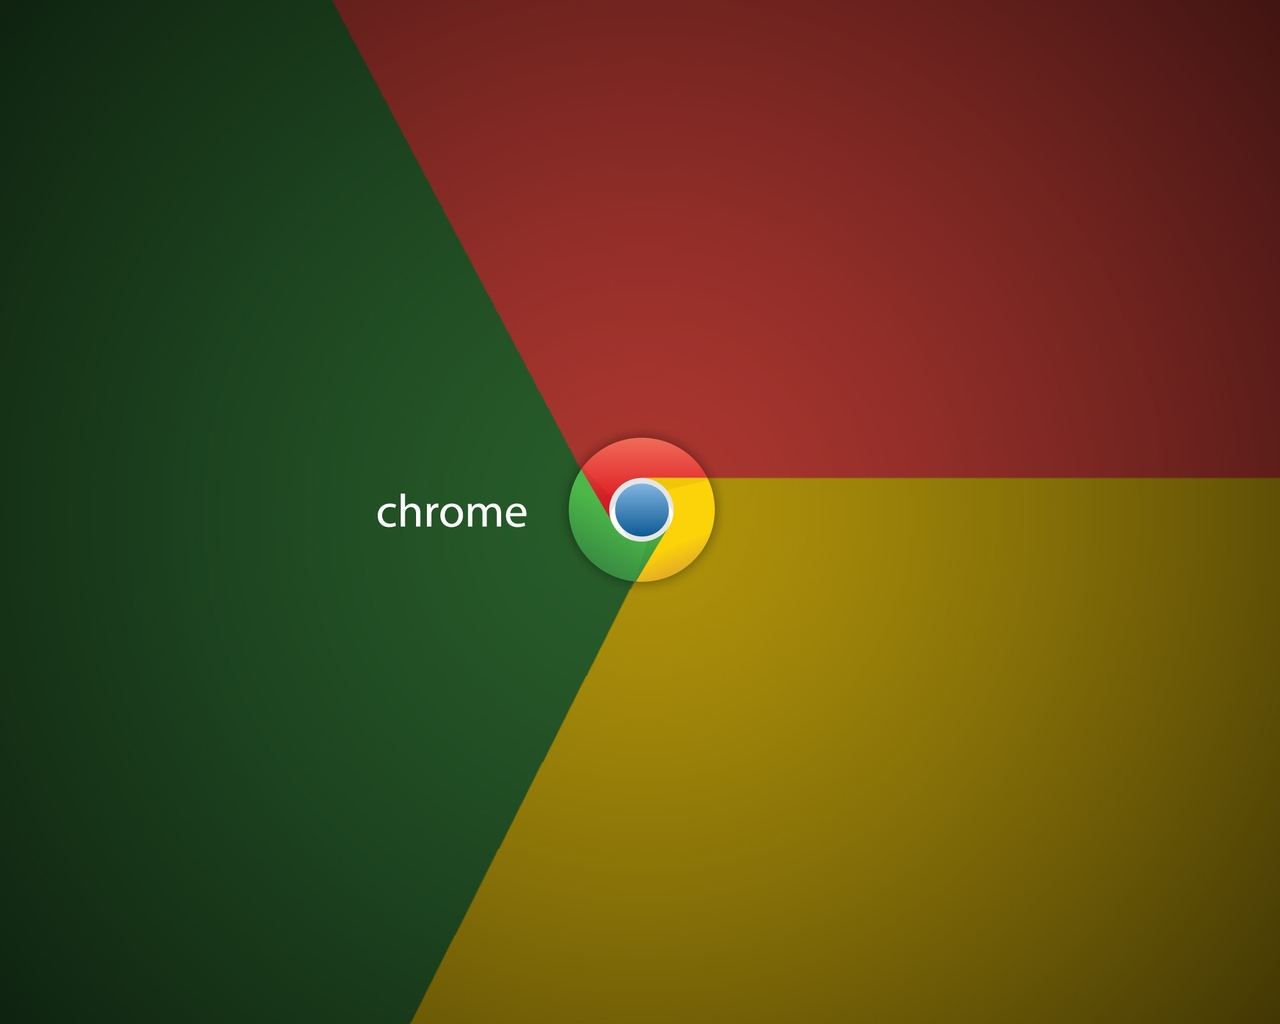 Just Google Chrome for 1280 x 1024 resolution